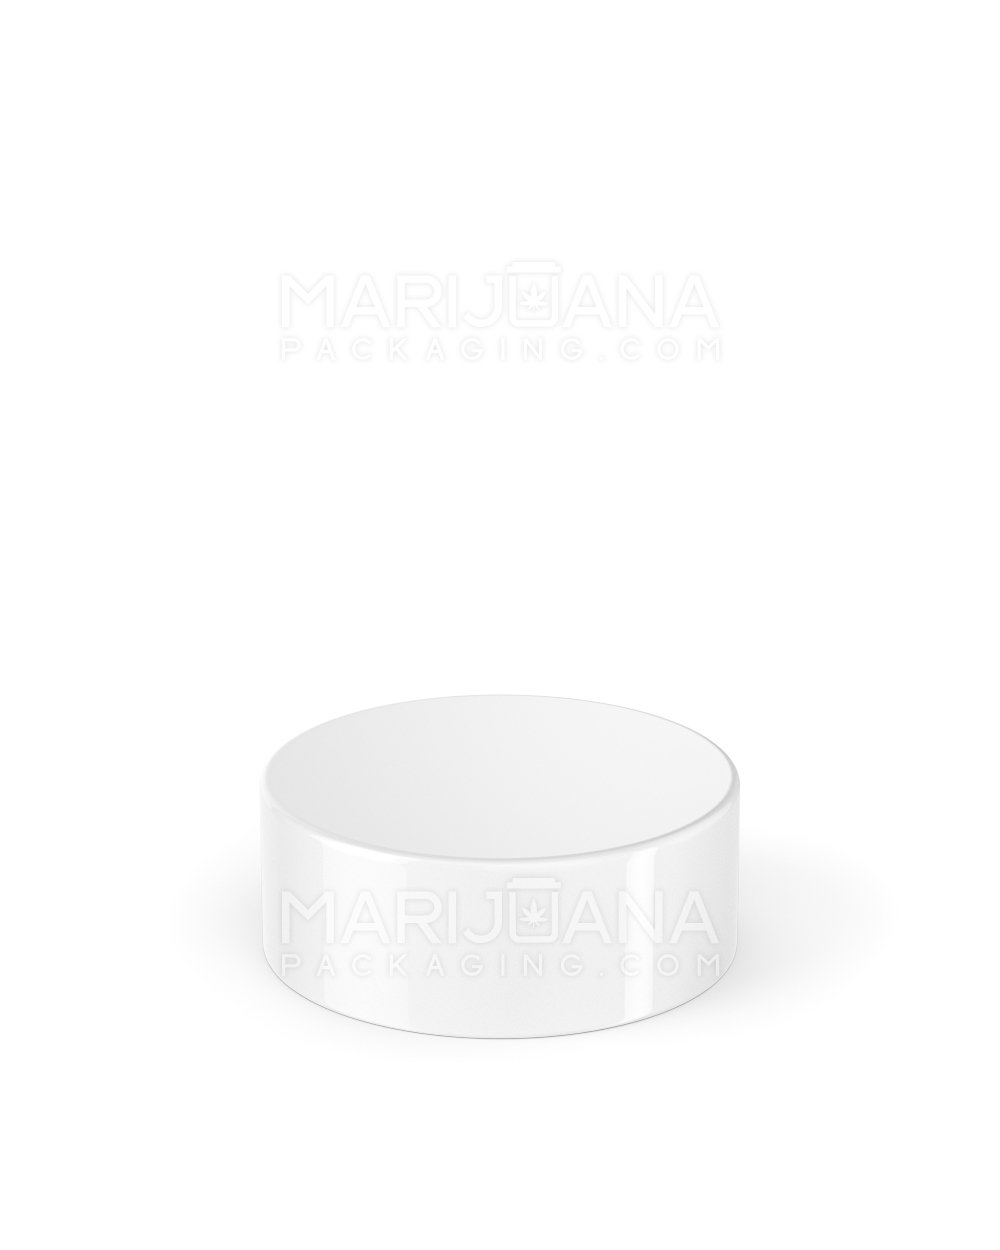 Child Resistant | Smooth Push Down & Turn Plastic Caps w/ Foil Liner | 38mm - Glossy White - 320 Count - 3